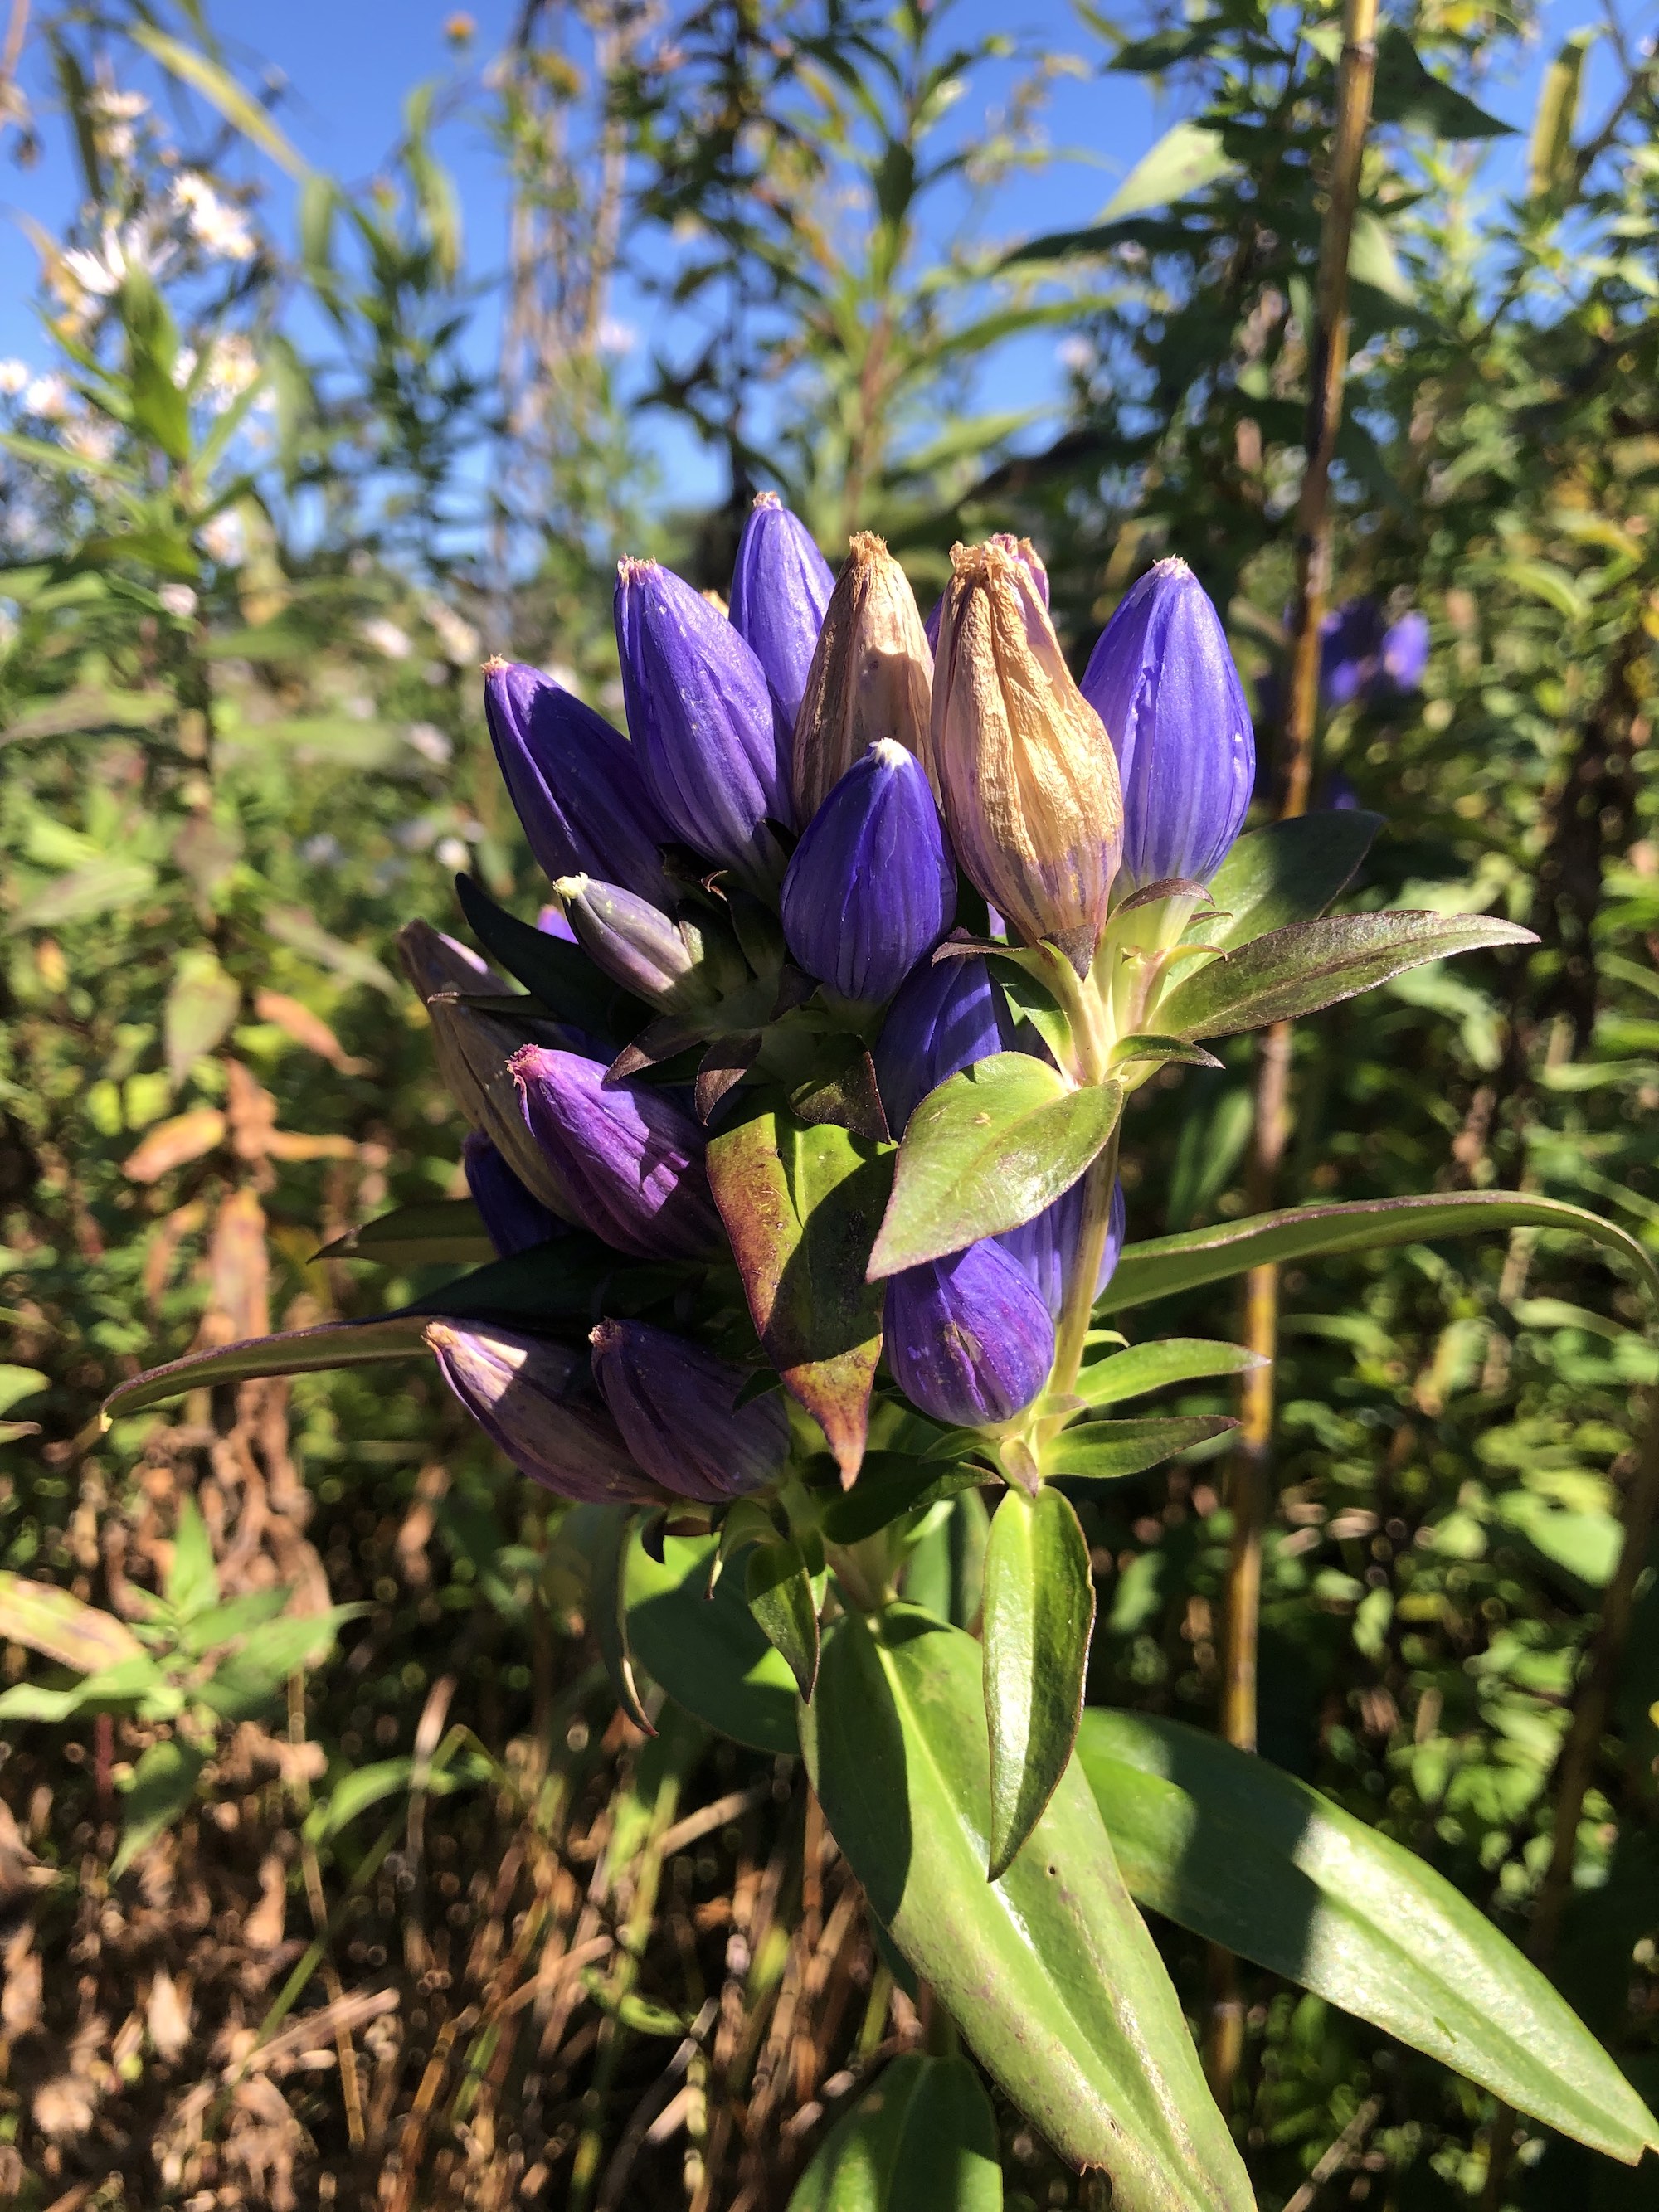 Closed Gentian at the edge of the UW Arboretum Curtis Prairie on the side of a service road on September 28, 2022.